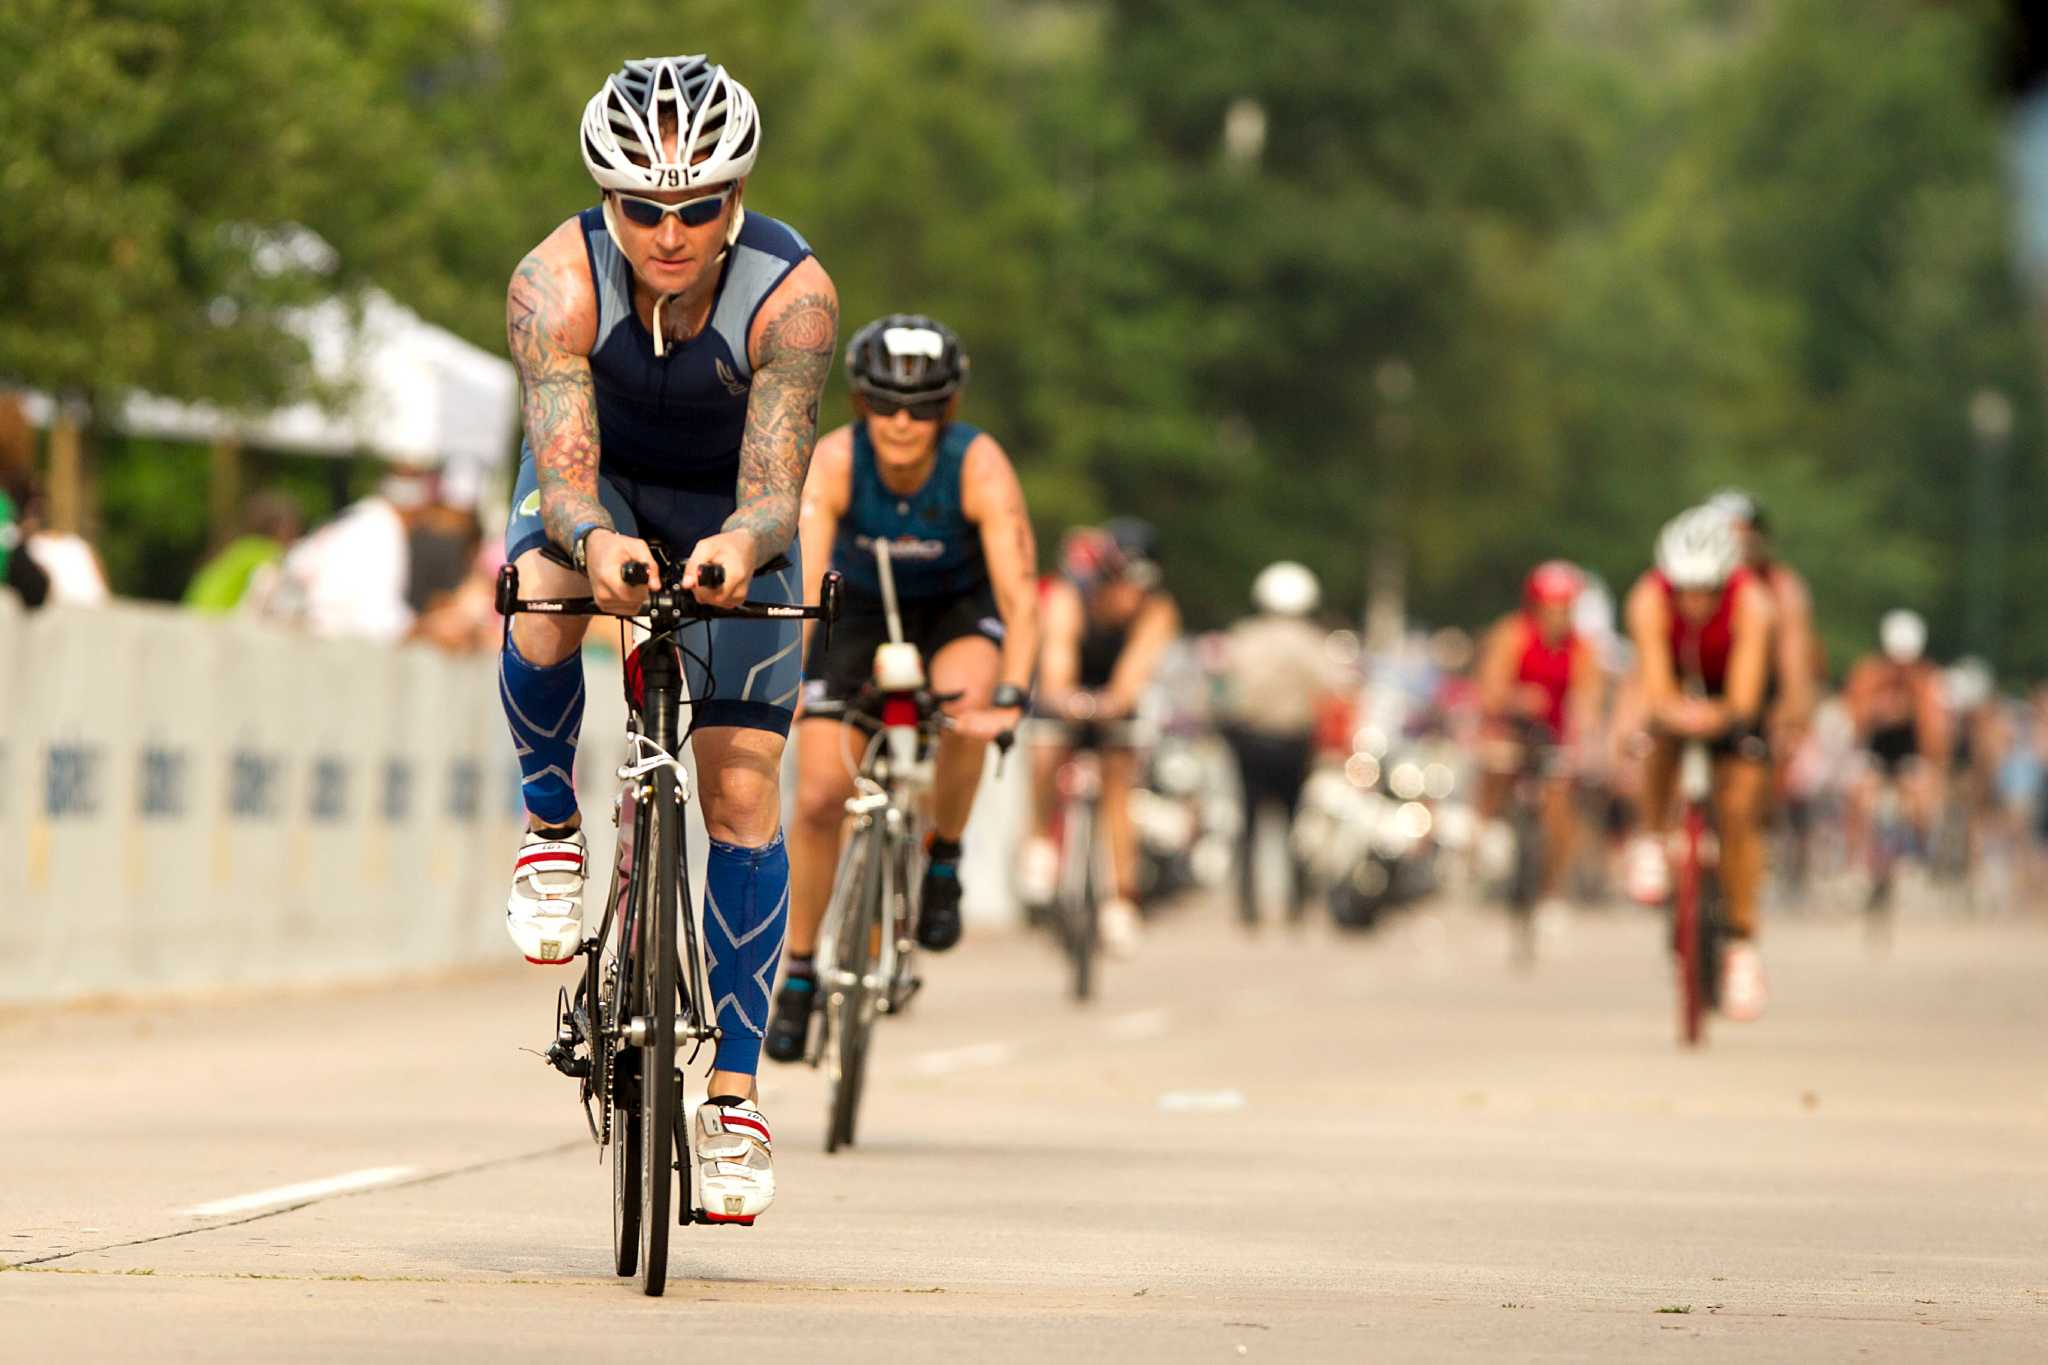 Ironman competition ready to roll through Woodlands